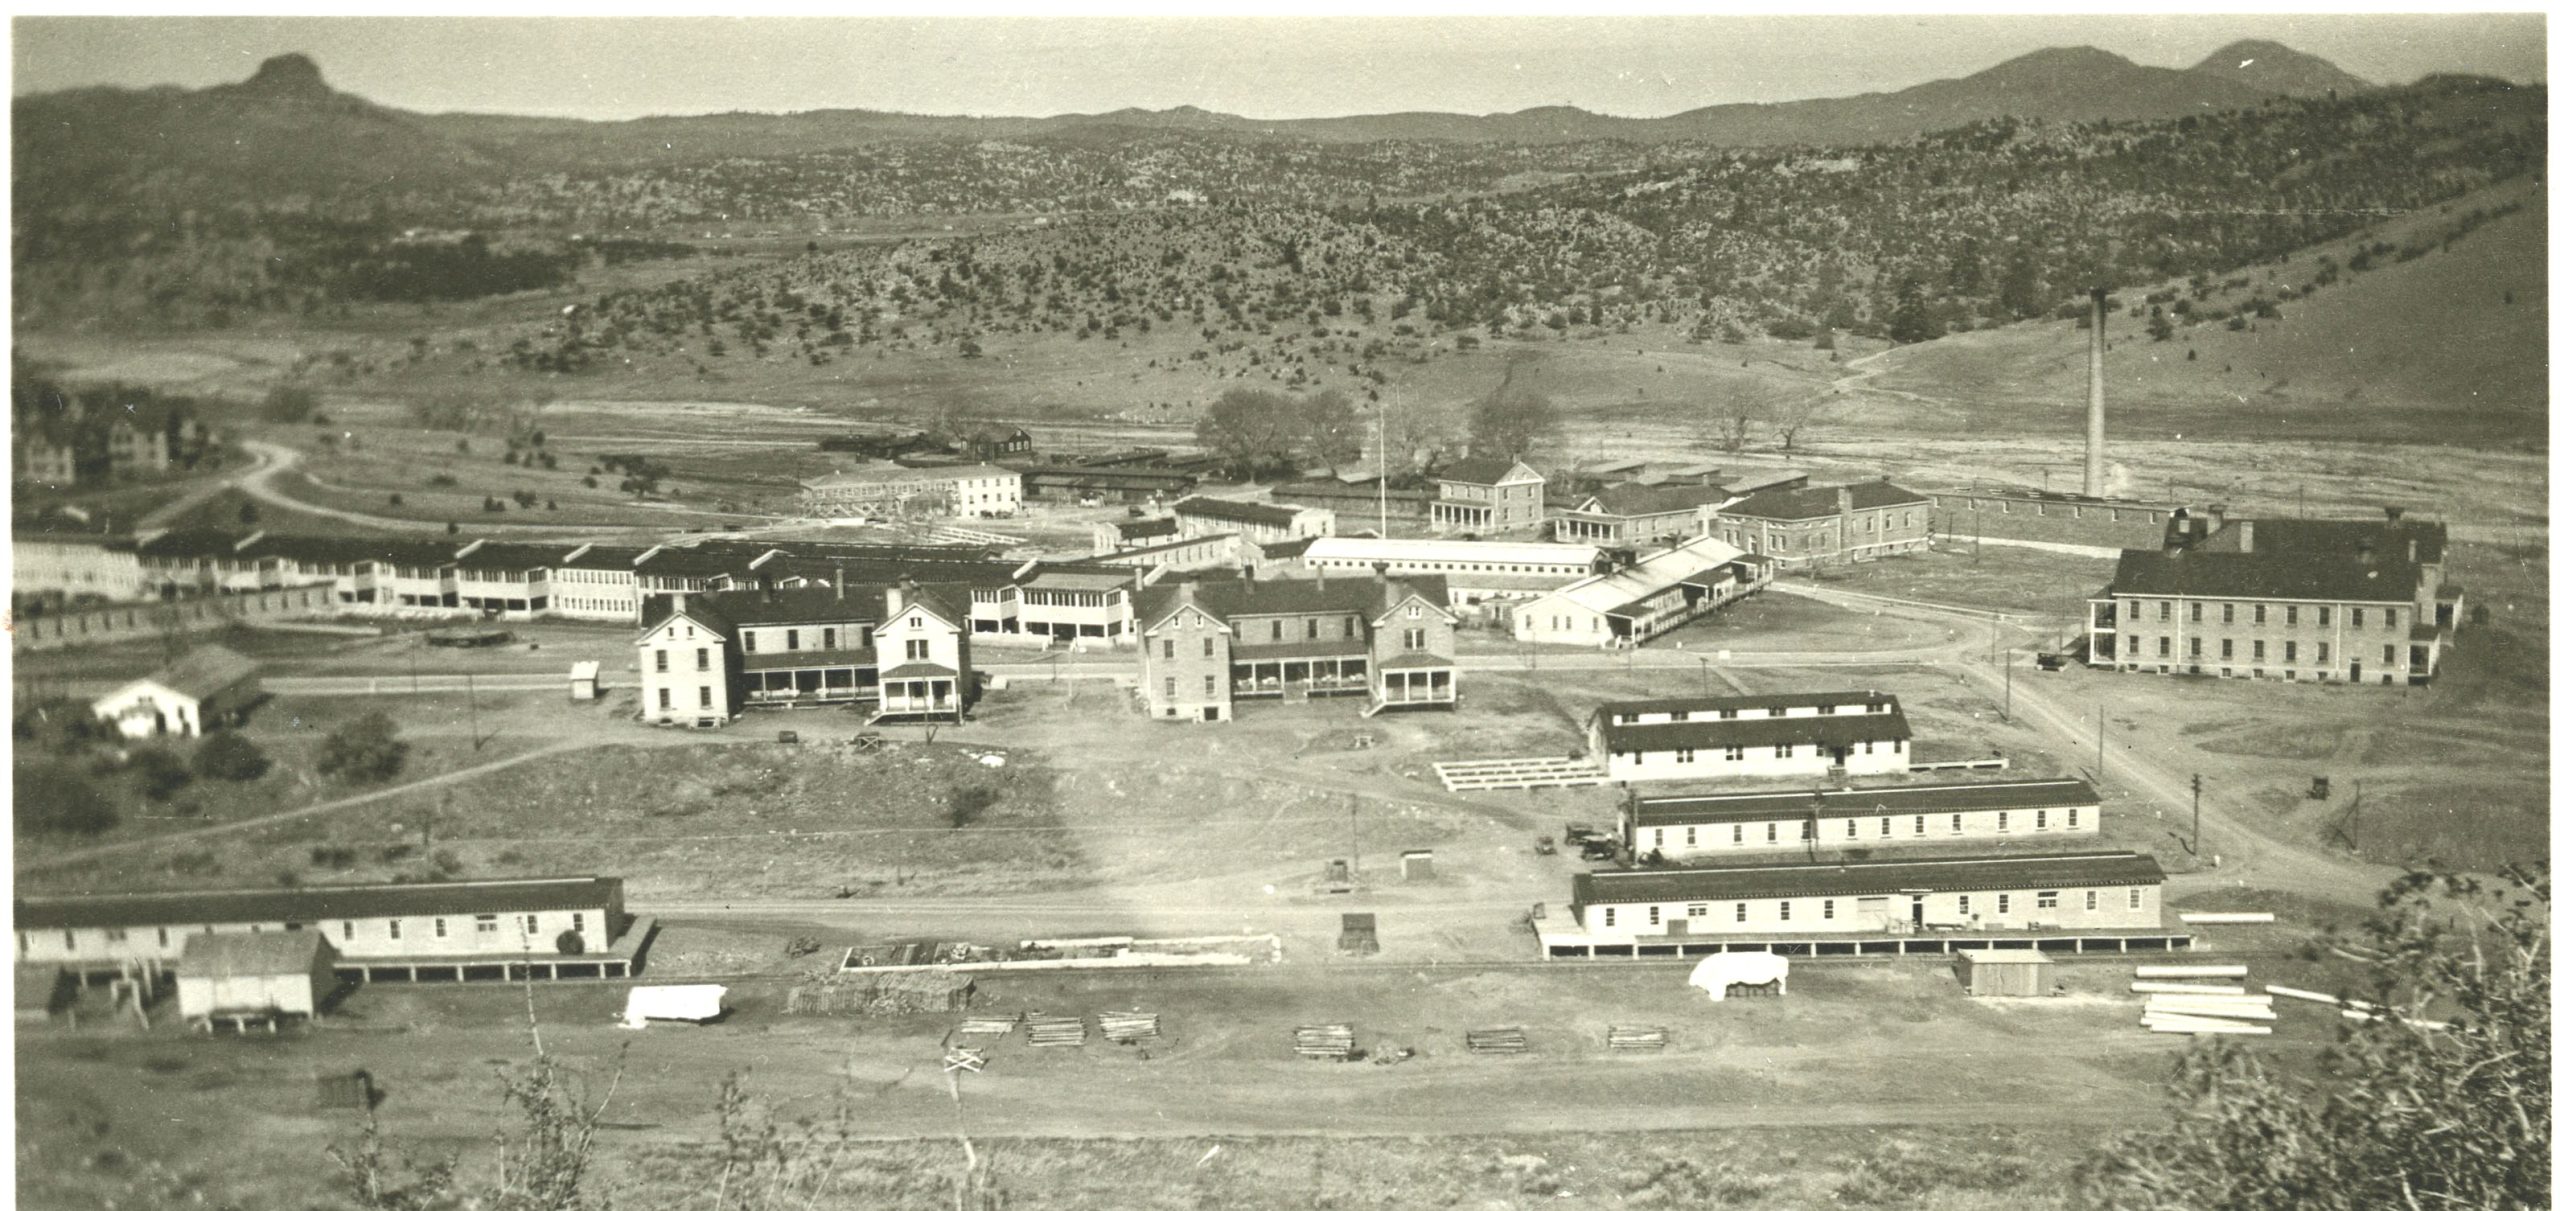 View of Whipple Barracks tuberculosis wards and other buildings when operated as U.S. Army General Hospital #20. (Sharlot Hall Museum).